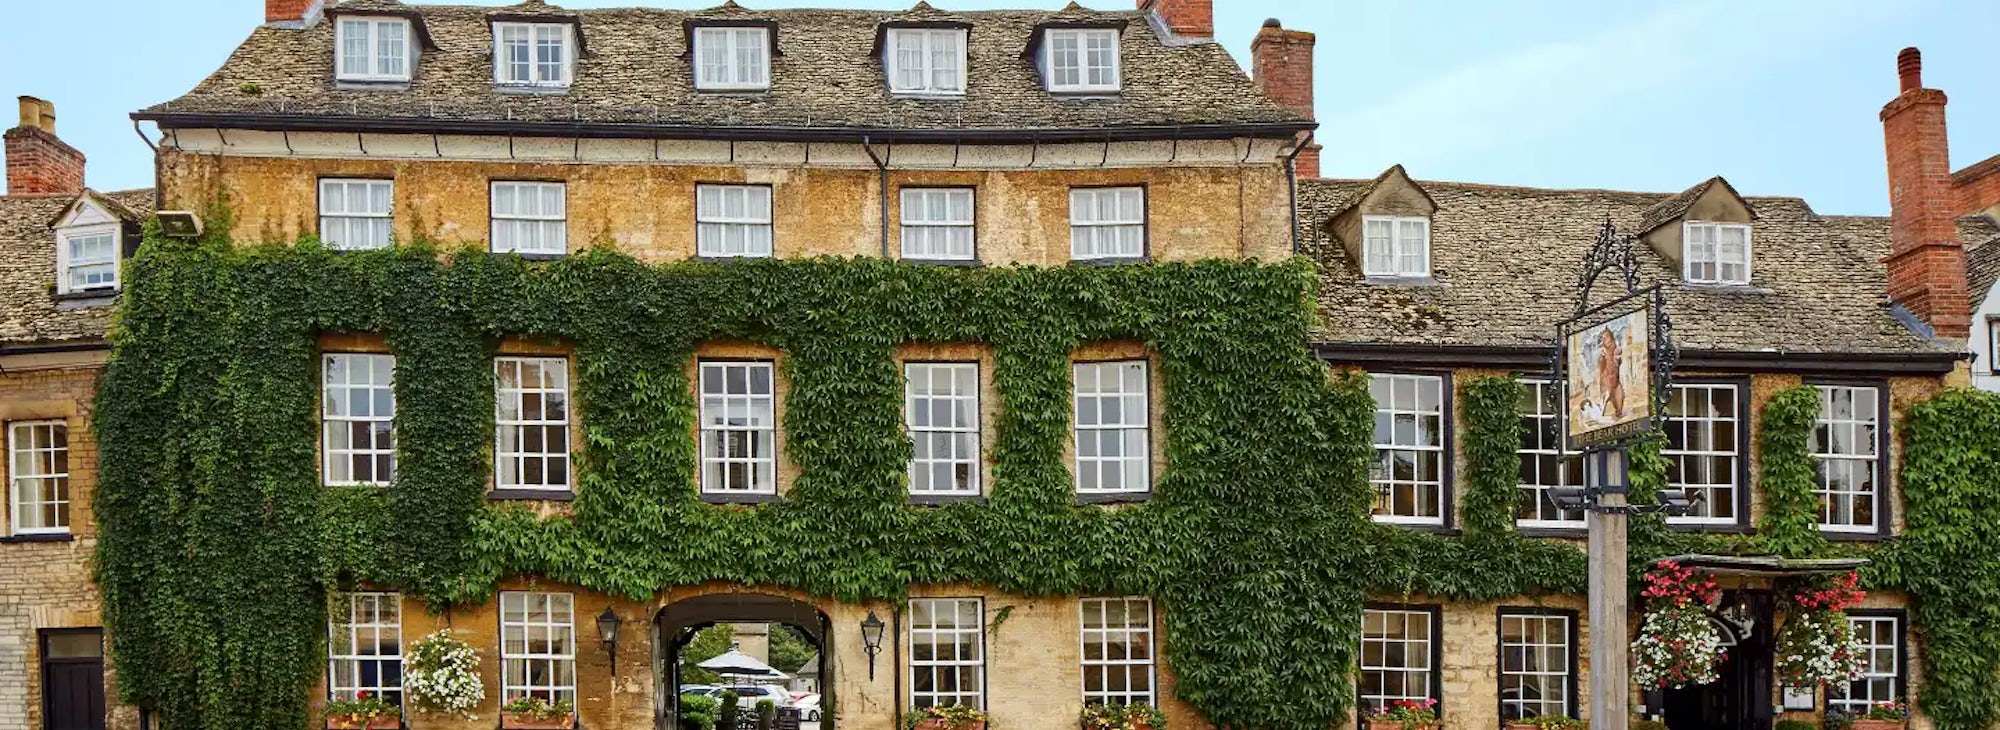 Dog Friendly Hotel, Cotswolds